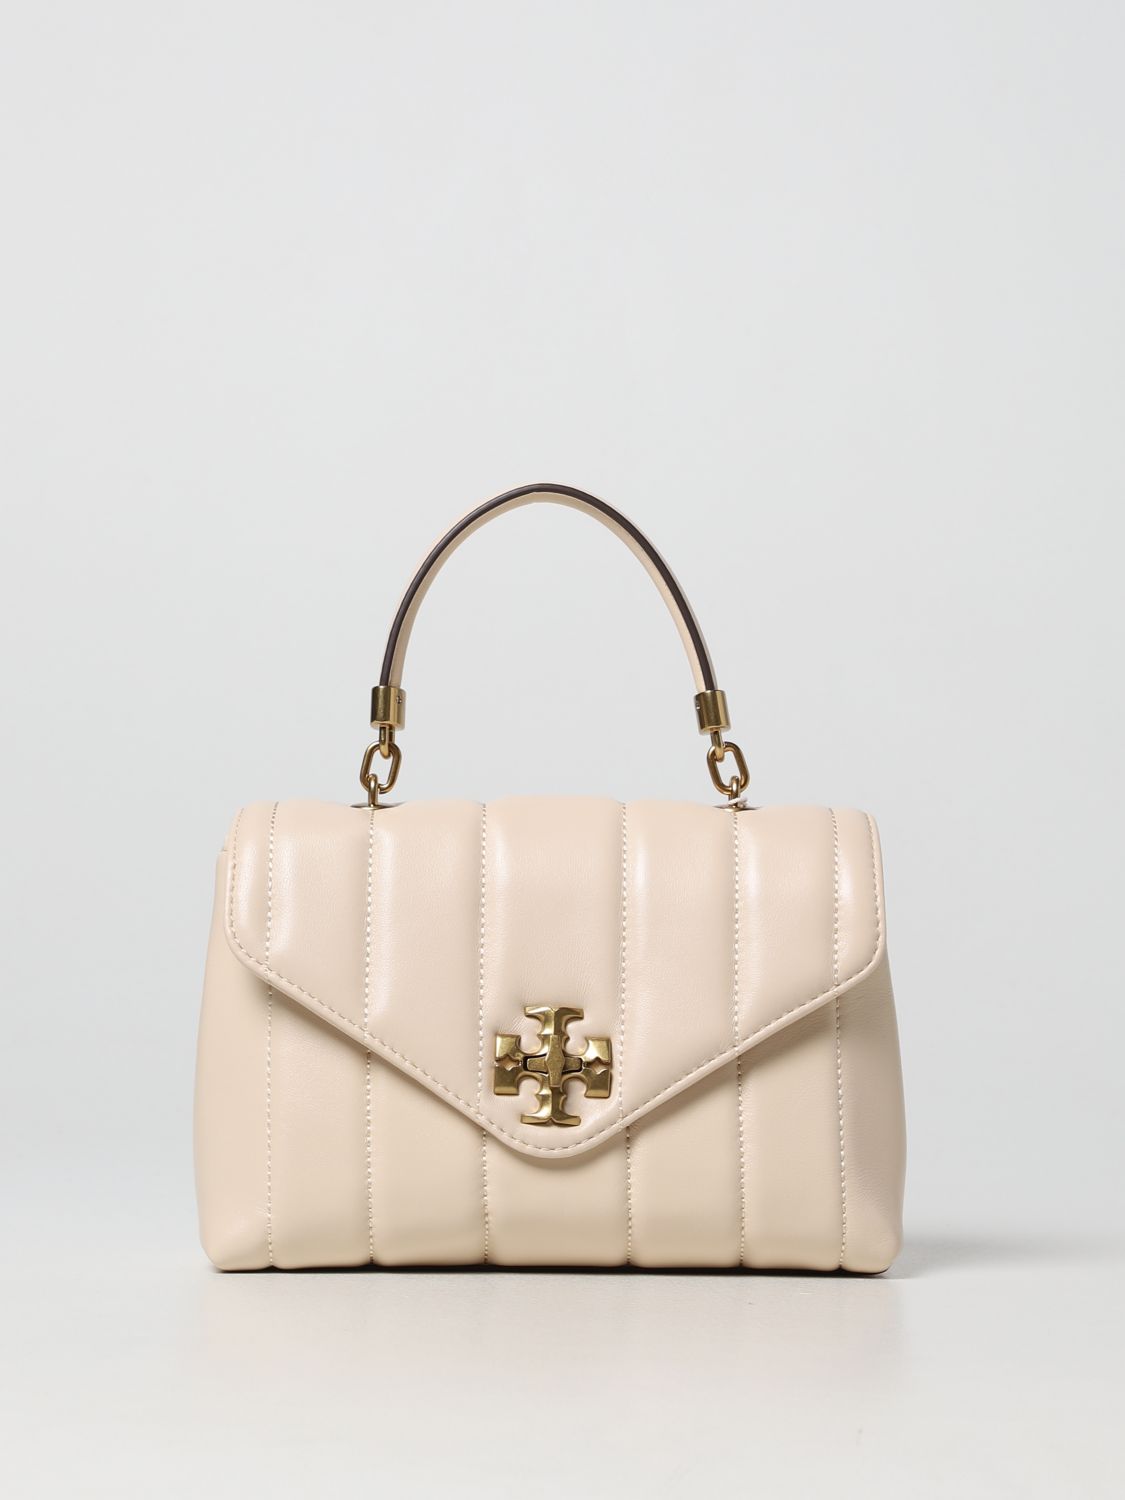 TORY BURCH: Kira bag in quilted leather - Ivory | Tory Burch handbag 83943  online on 